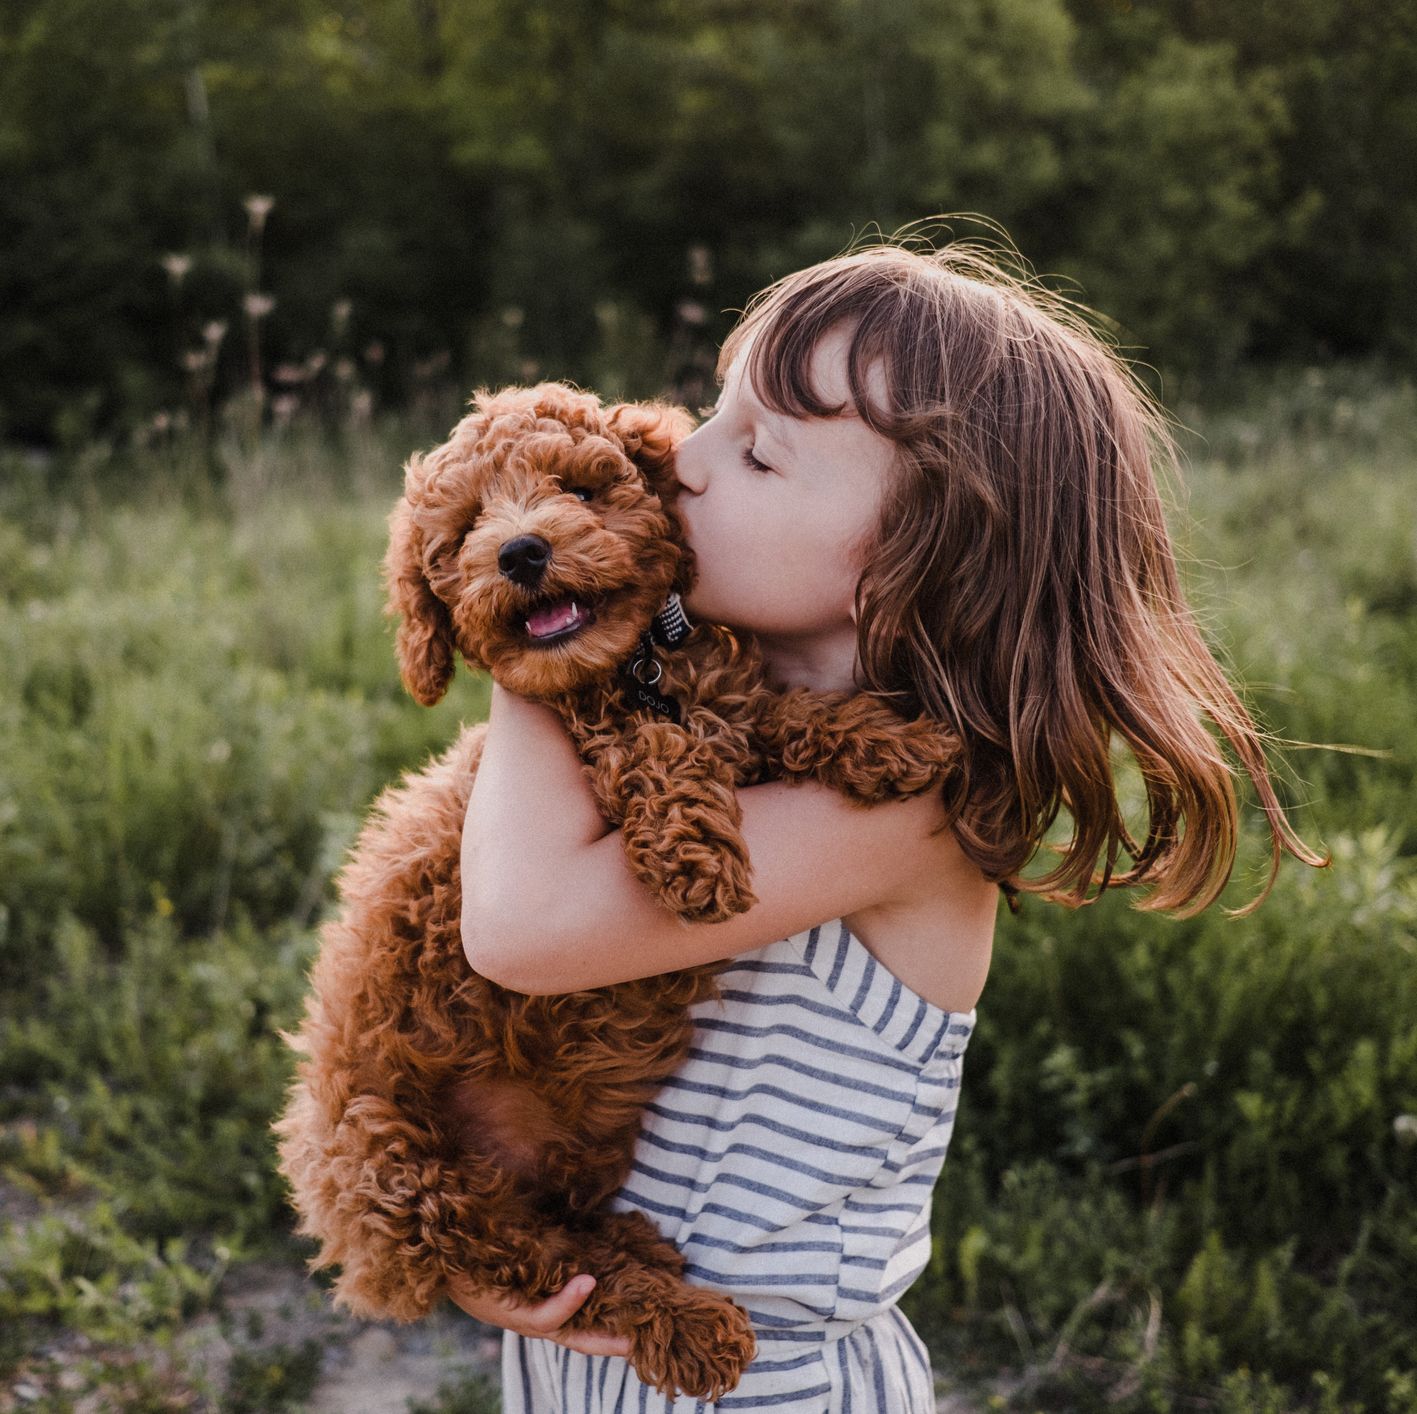 Girl with dog outside playing